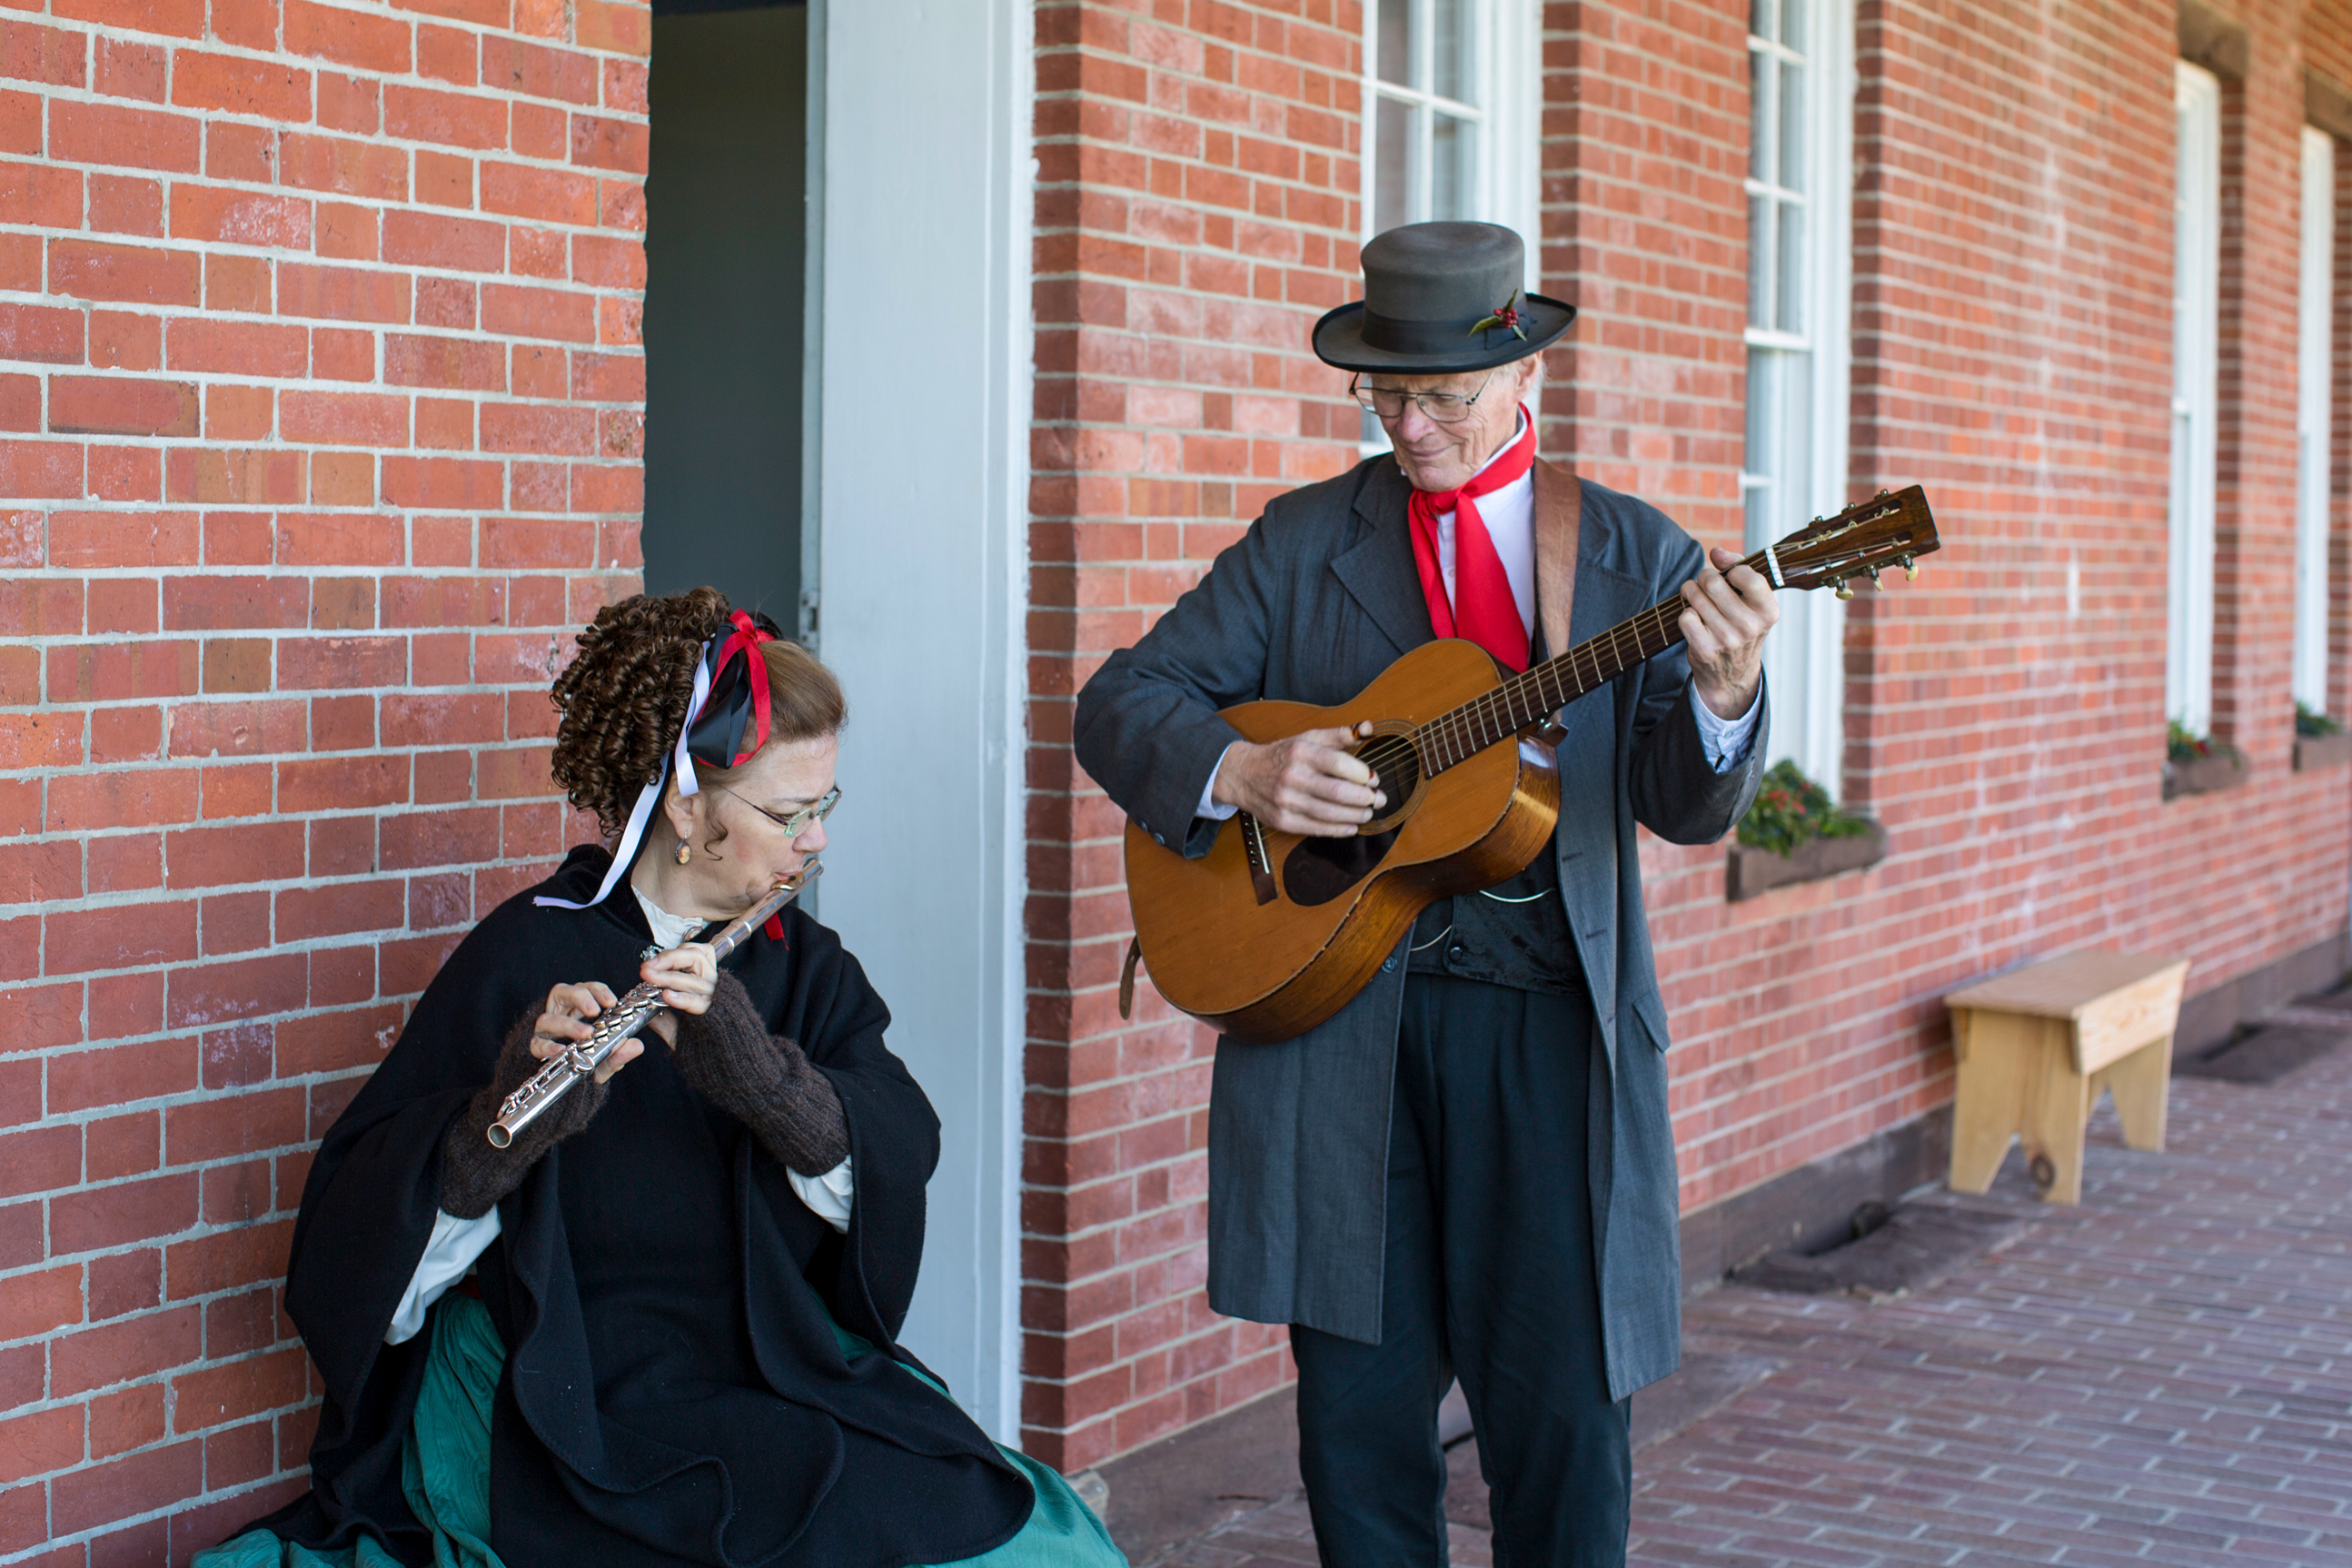 A man dressed in 1800s civilian clothing plays a guitar while standing and a woman dressed in an 1800s dress plays the flute while sitting.